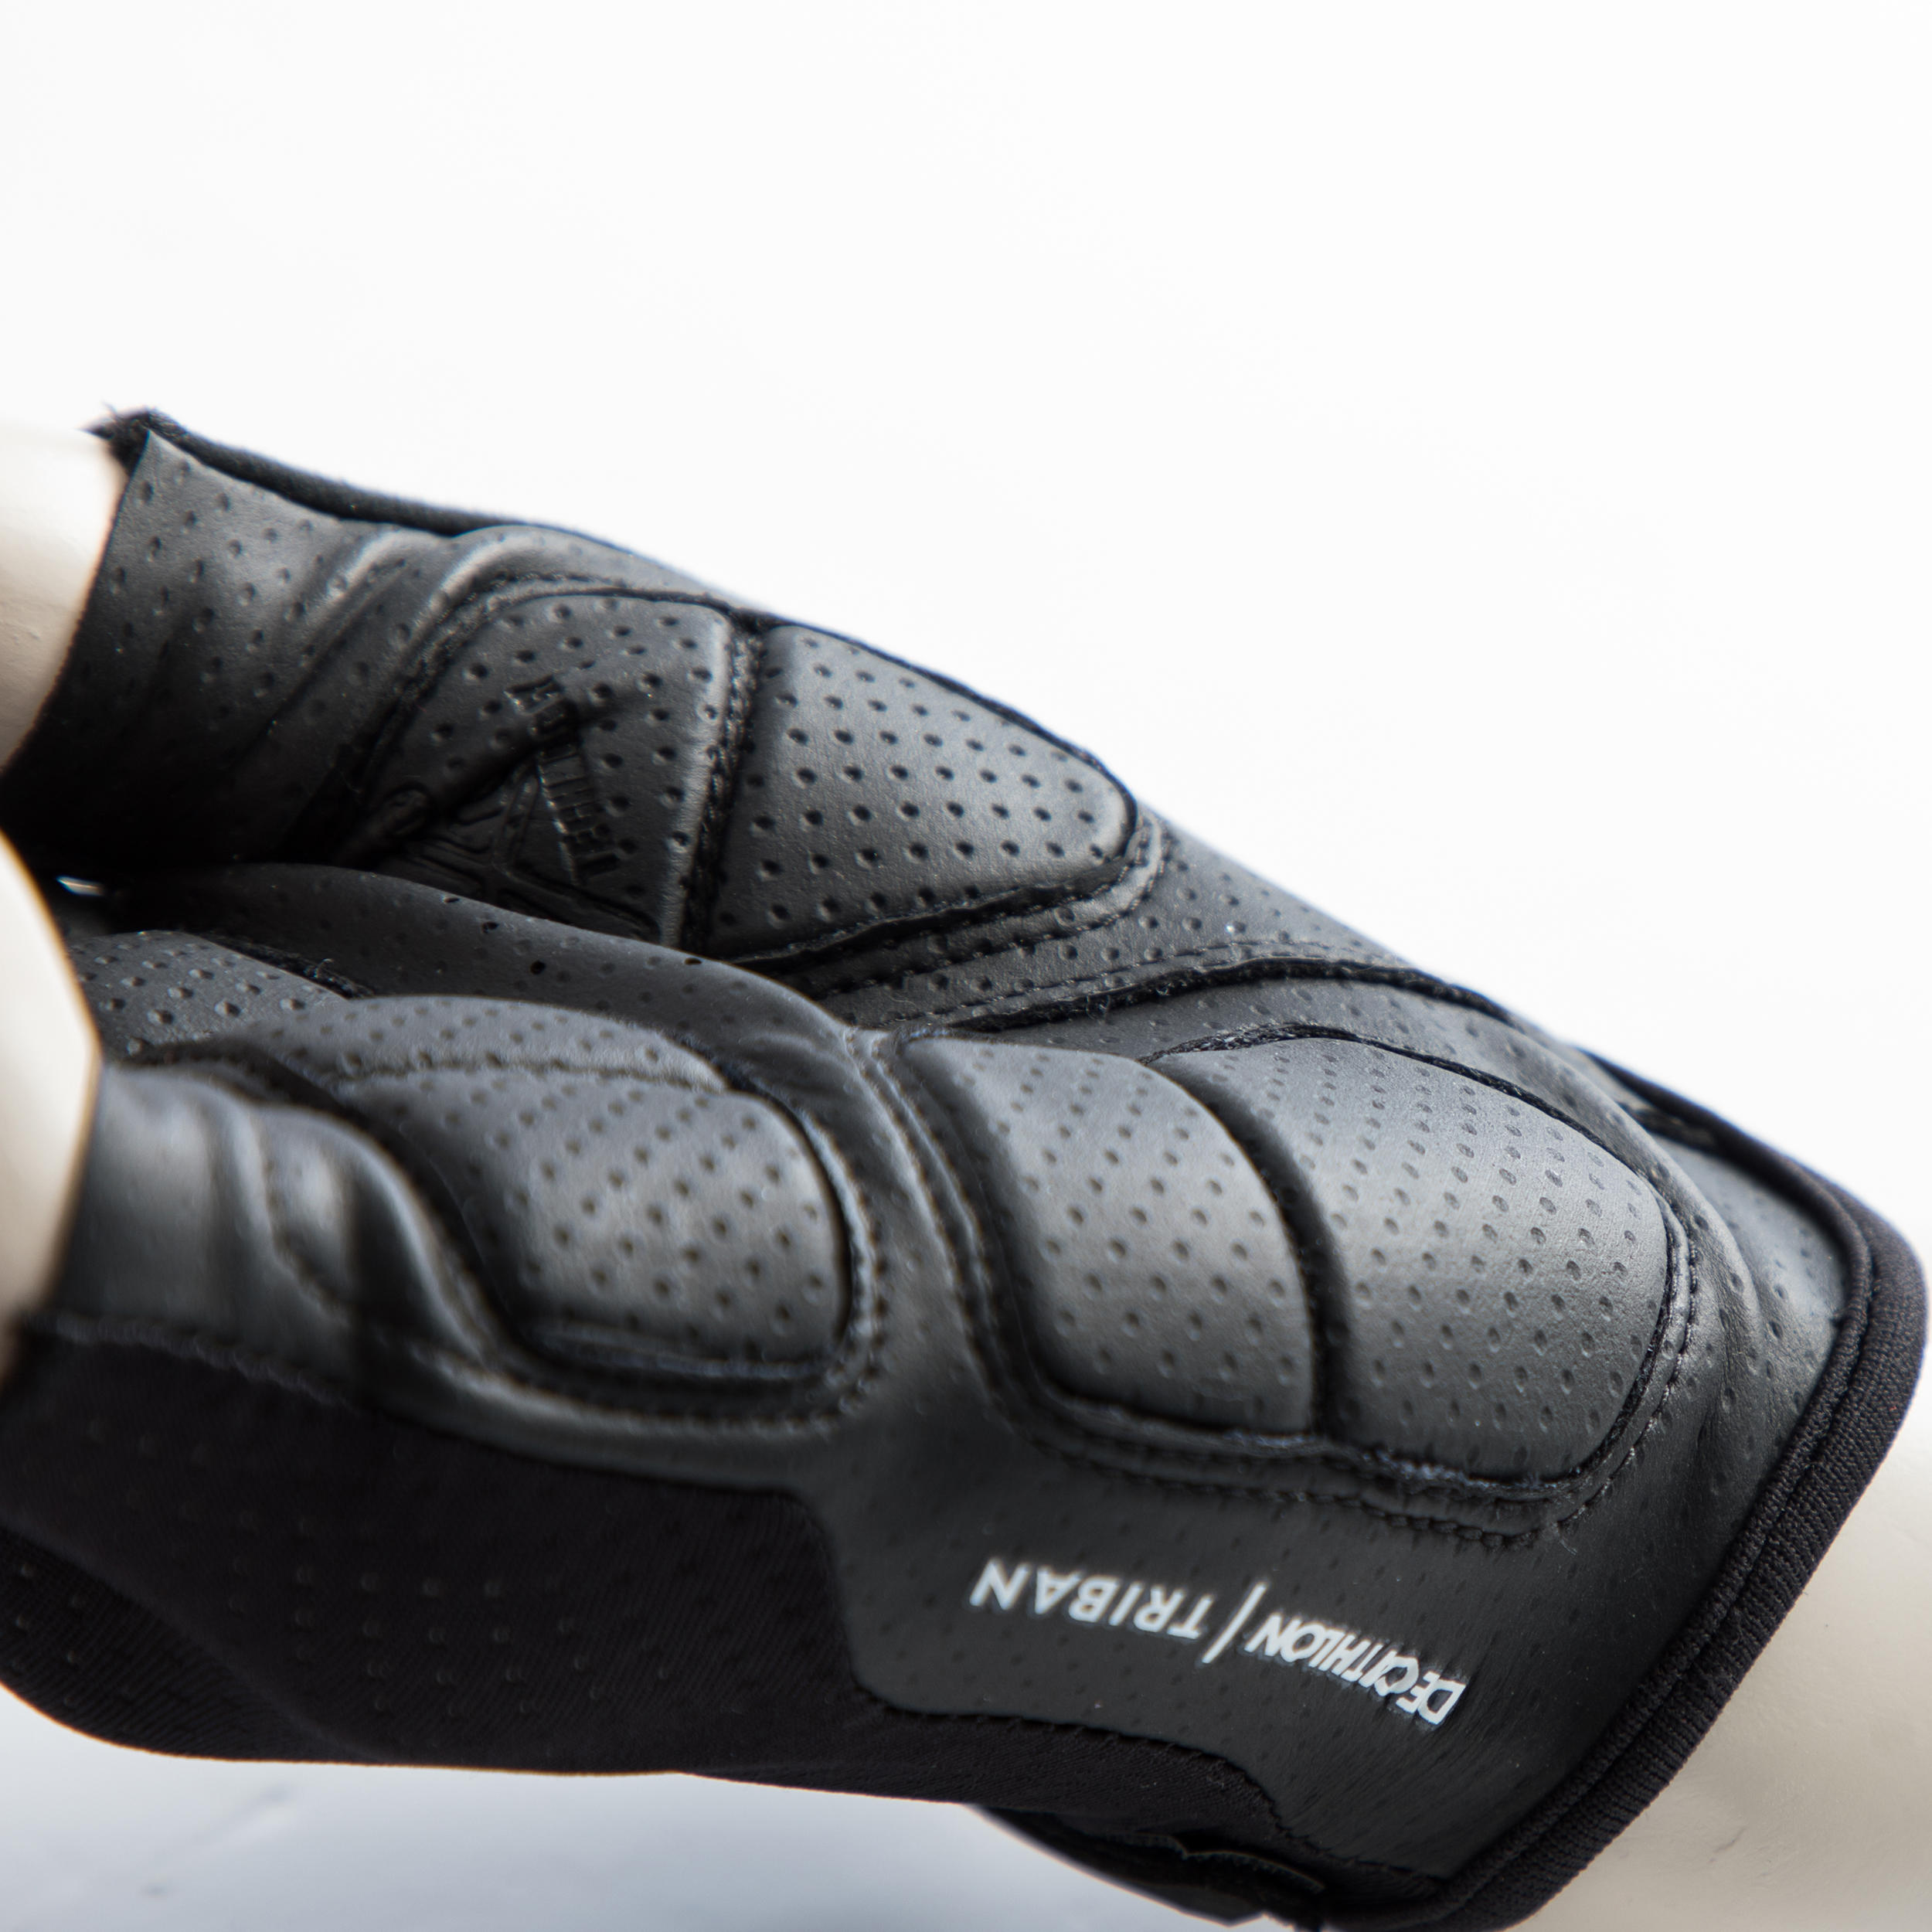 RoadCycling 900 Road Cycling Gloves - Black 9/11